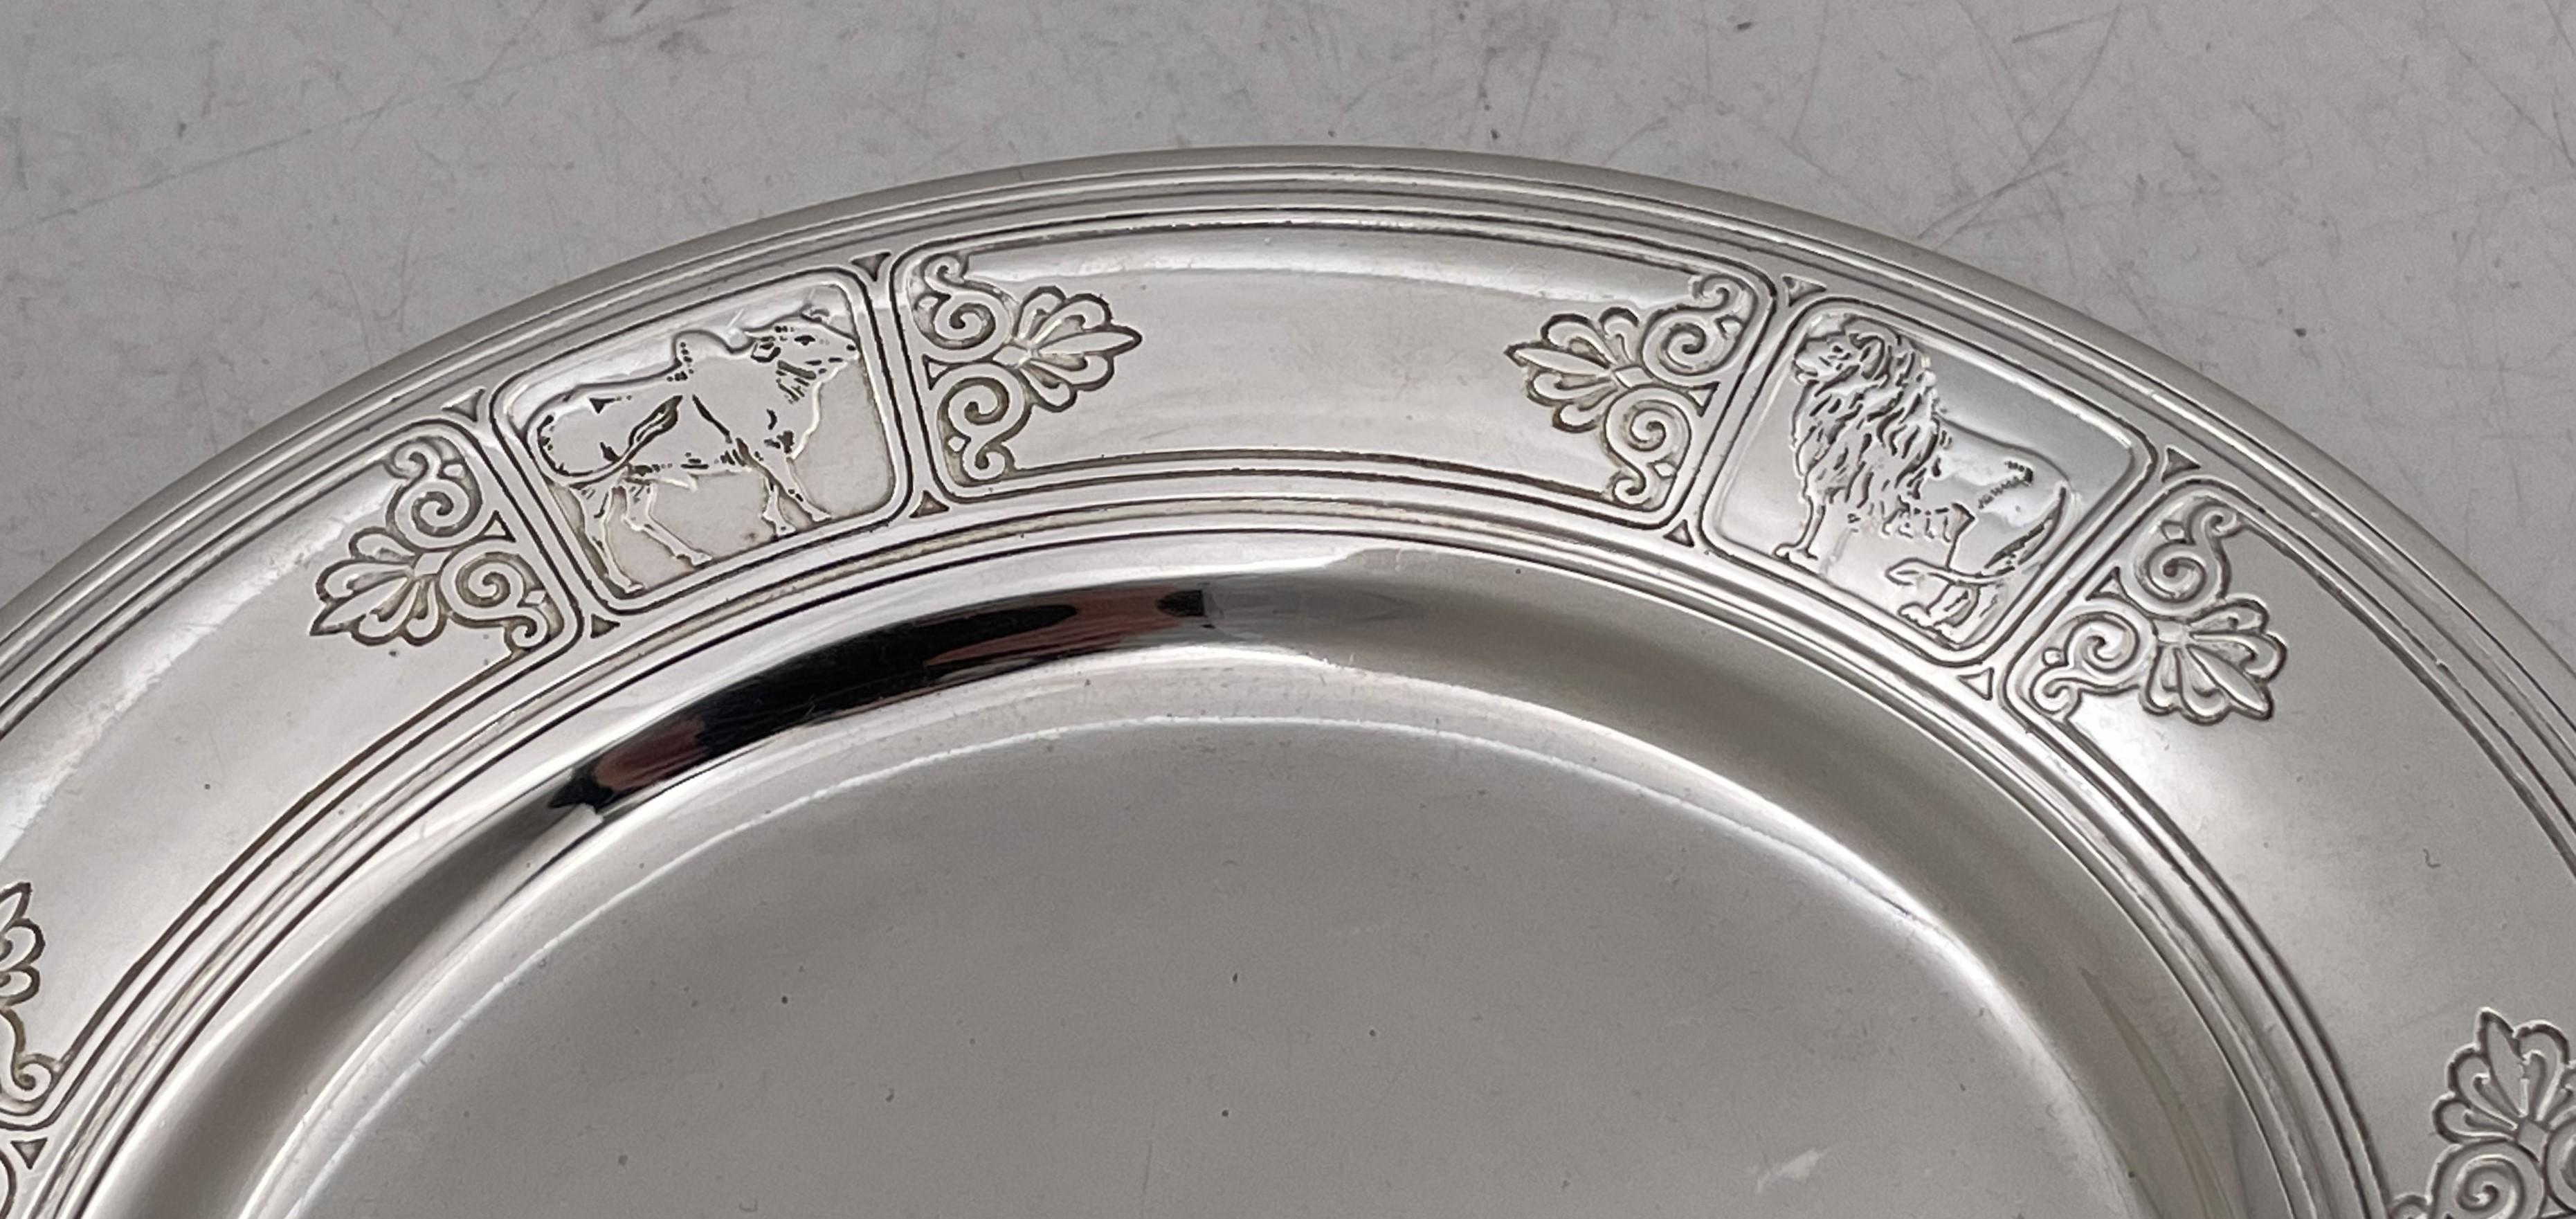 Early 20th Century Tiffany & Co. Sterling Silver 1927 Child's Plate / Dish with Animal Motifs For Sale